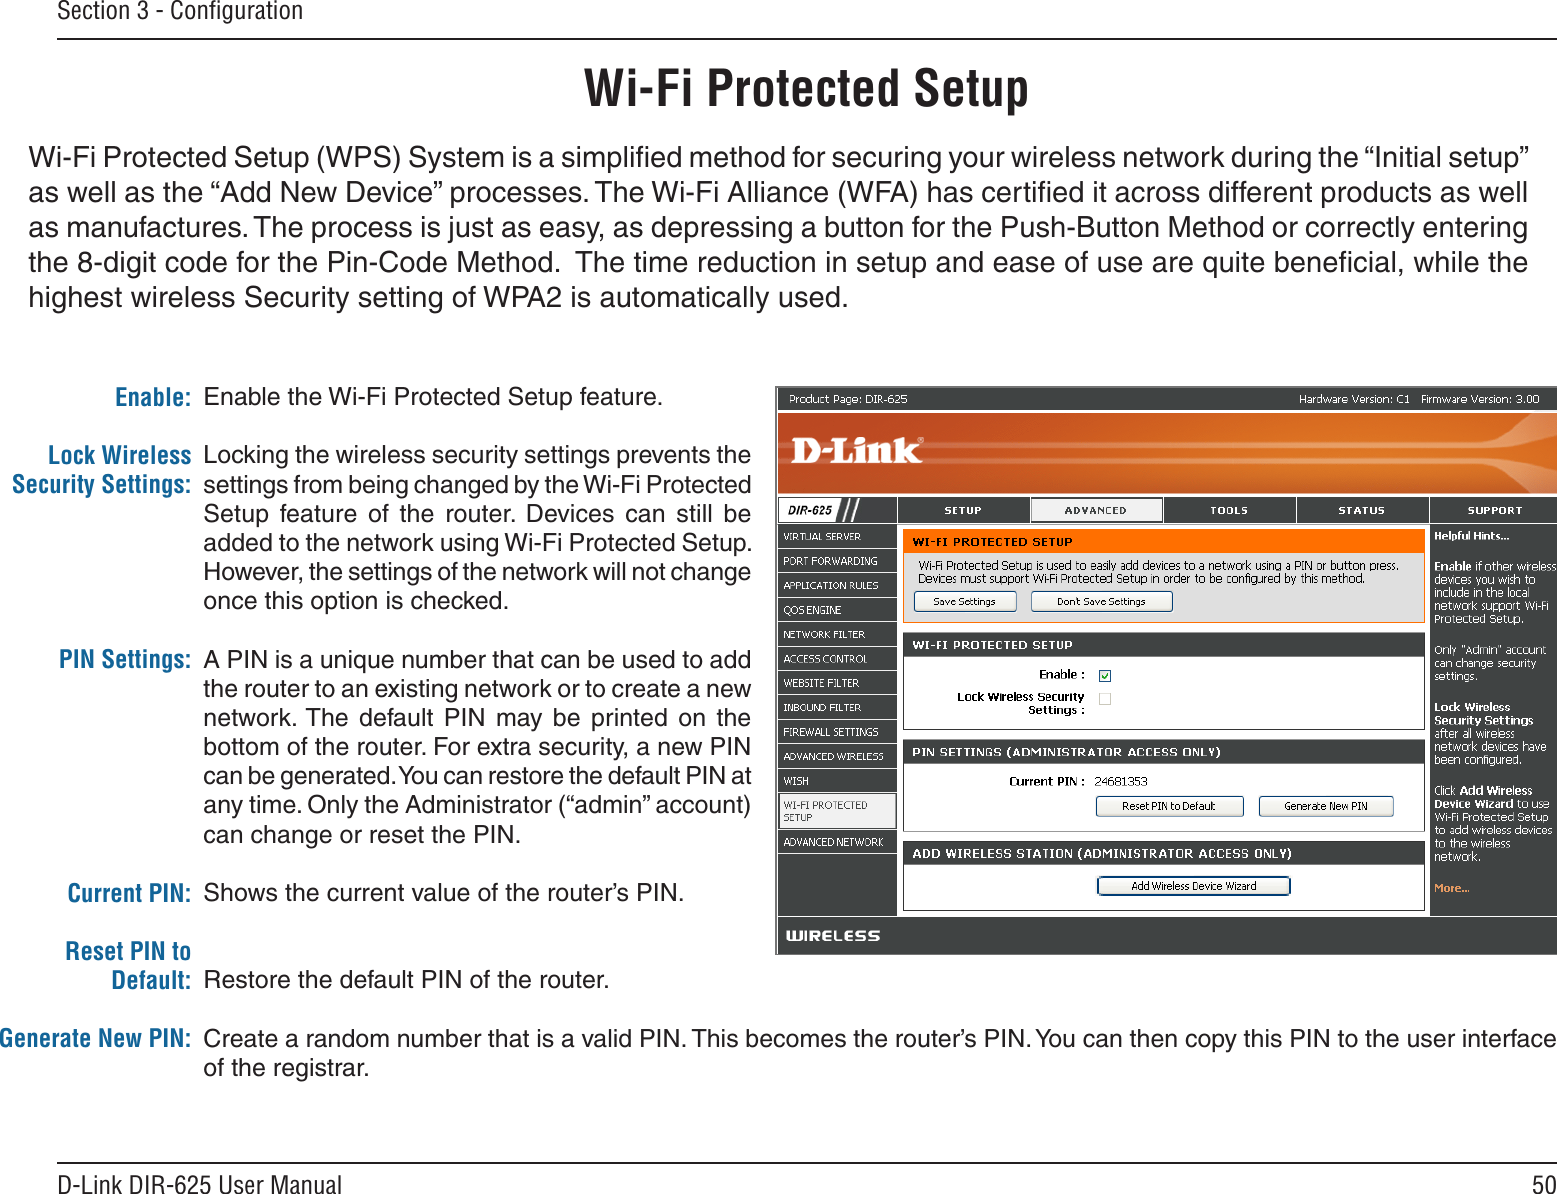 50D-Link DIR-625 User ManualSection 3 - ConﬁgurationEnable the Wi-Fi Protected Setup feature. Locking the wireless security settings prevents the settings from being changed by the Wi-Fi Protected Setup  feature  of  the  router.  Devices  can  still  be added to the network using Wi-Fi Protected Setup. However, the settings of the network will not change once this option is checked.A PIN is a unique number that can be used to add the router to an existing network or to create a new network. The  default PIN  may  be  printed  on  the bottom of the router. For extra security, a new PIN can be generated. You can restore the default PIN at any time. Only the Administrator (“admin” account) can change or reset the PIN. Shows the current value of the router’s PIN. Restore the default PIN of the router. Create a random number that is a valid PIN. This becomes the router’s PIN. You can then copy this PIN to the user interface of the registrar.Enable:Lock Wireless Security Settings:PIN Settings:Current PIN:Reset PIN to Default:Generate New PIN:Wi-Fi Protected SetupWi-Fi Protected Setup (WPS) System is a simpliﬁed method for securing your wireless network during the “Initial setup” as well as the “Add New Device” processes. The Wi-Fi Alliance (WFA) has certiﬁed it across different products as well as manufactures. The process is just as easy, as depressing a button for the Push-Button Method or correctly entering the 8-digit code for the Pin-Code Method.  The time reduction in setup and ease of use are quite beneﬁcial, while the highest wireless Security setting of WPA2 is automatically used.